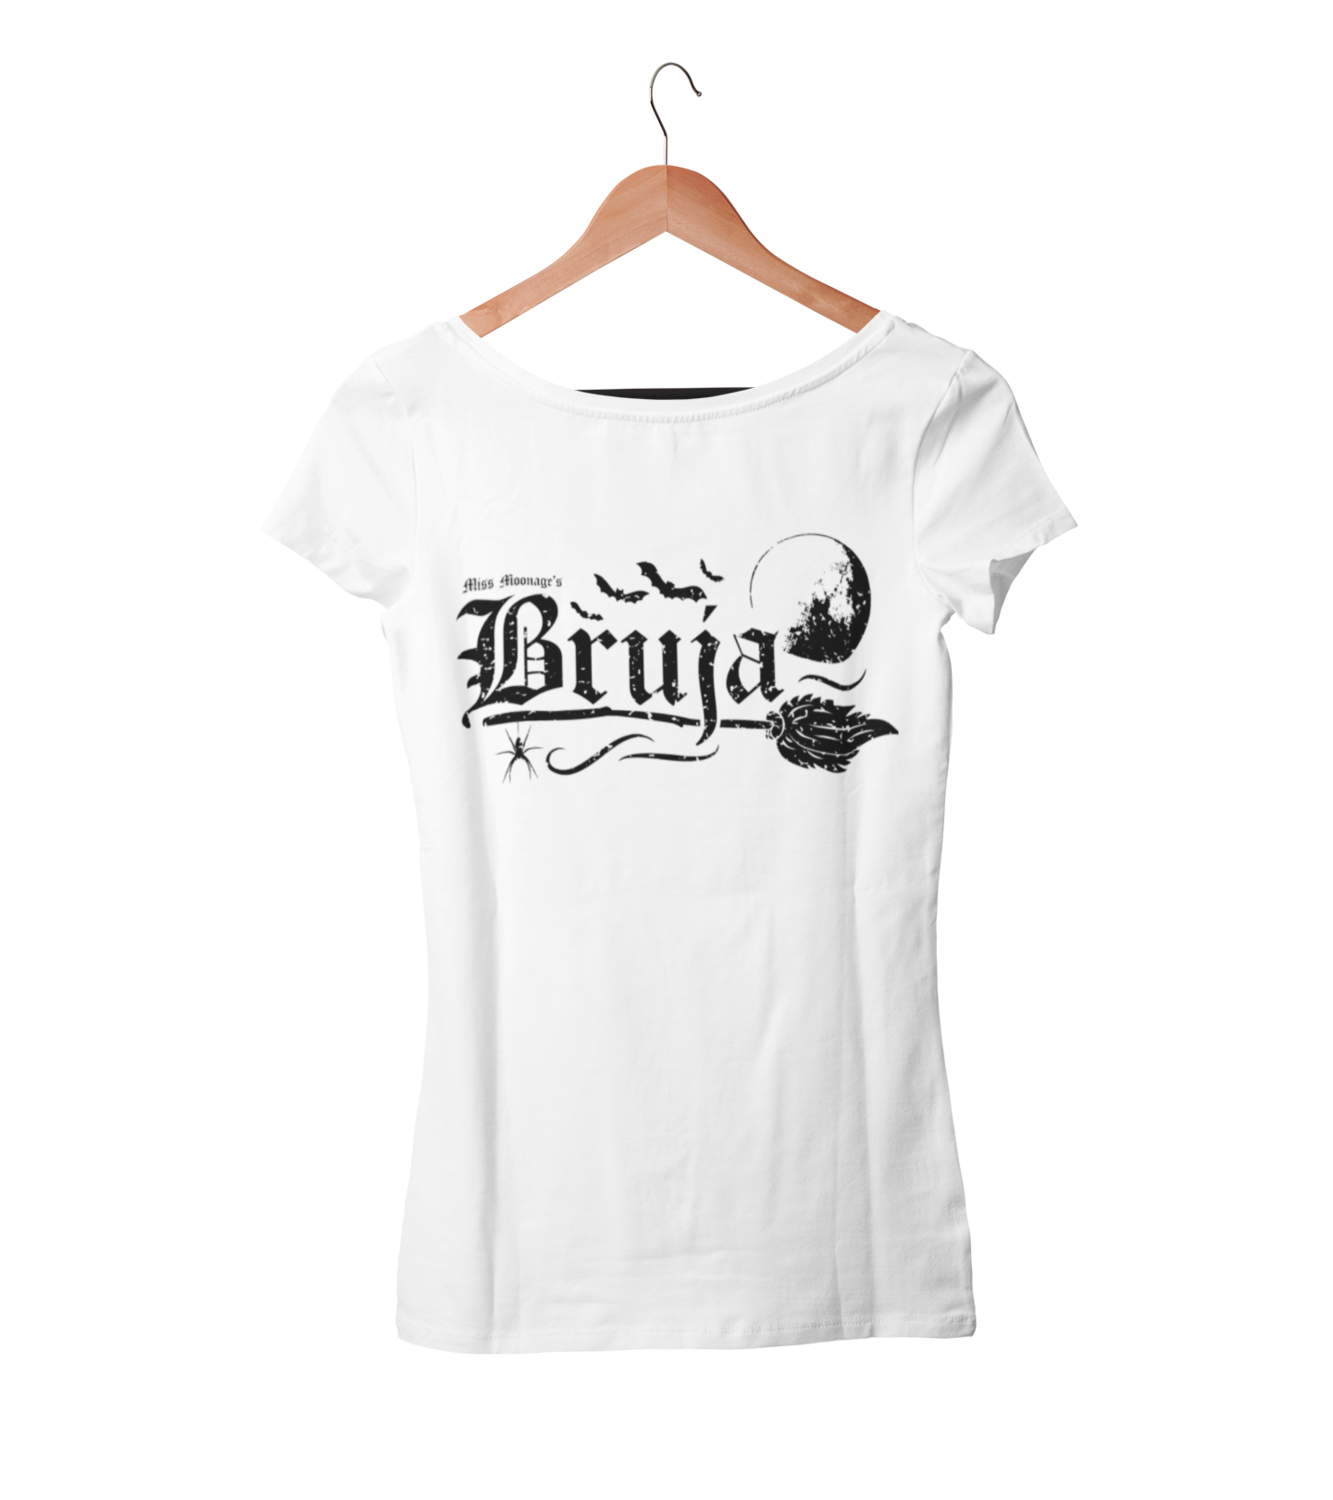 BRUJA by MISS MOONAGE tshirt for WOMEN